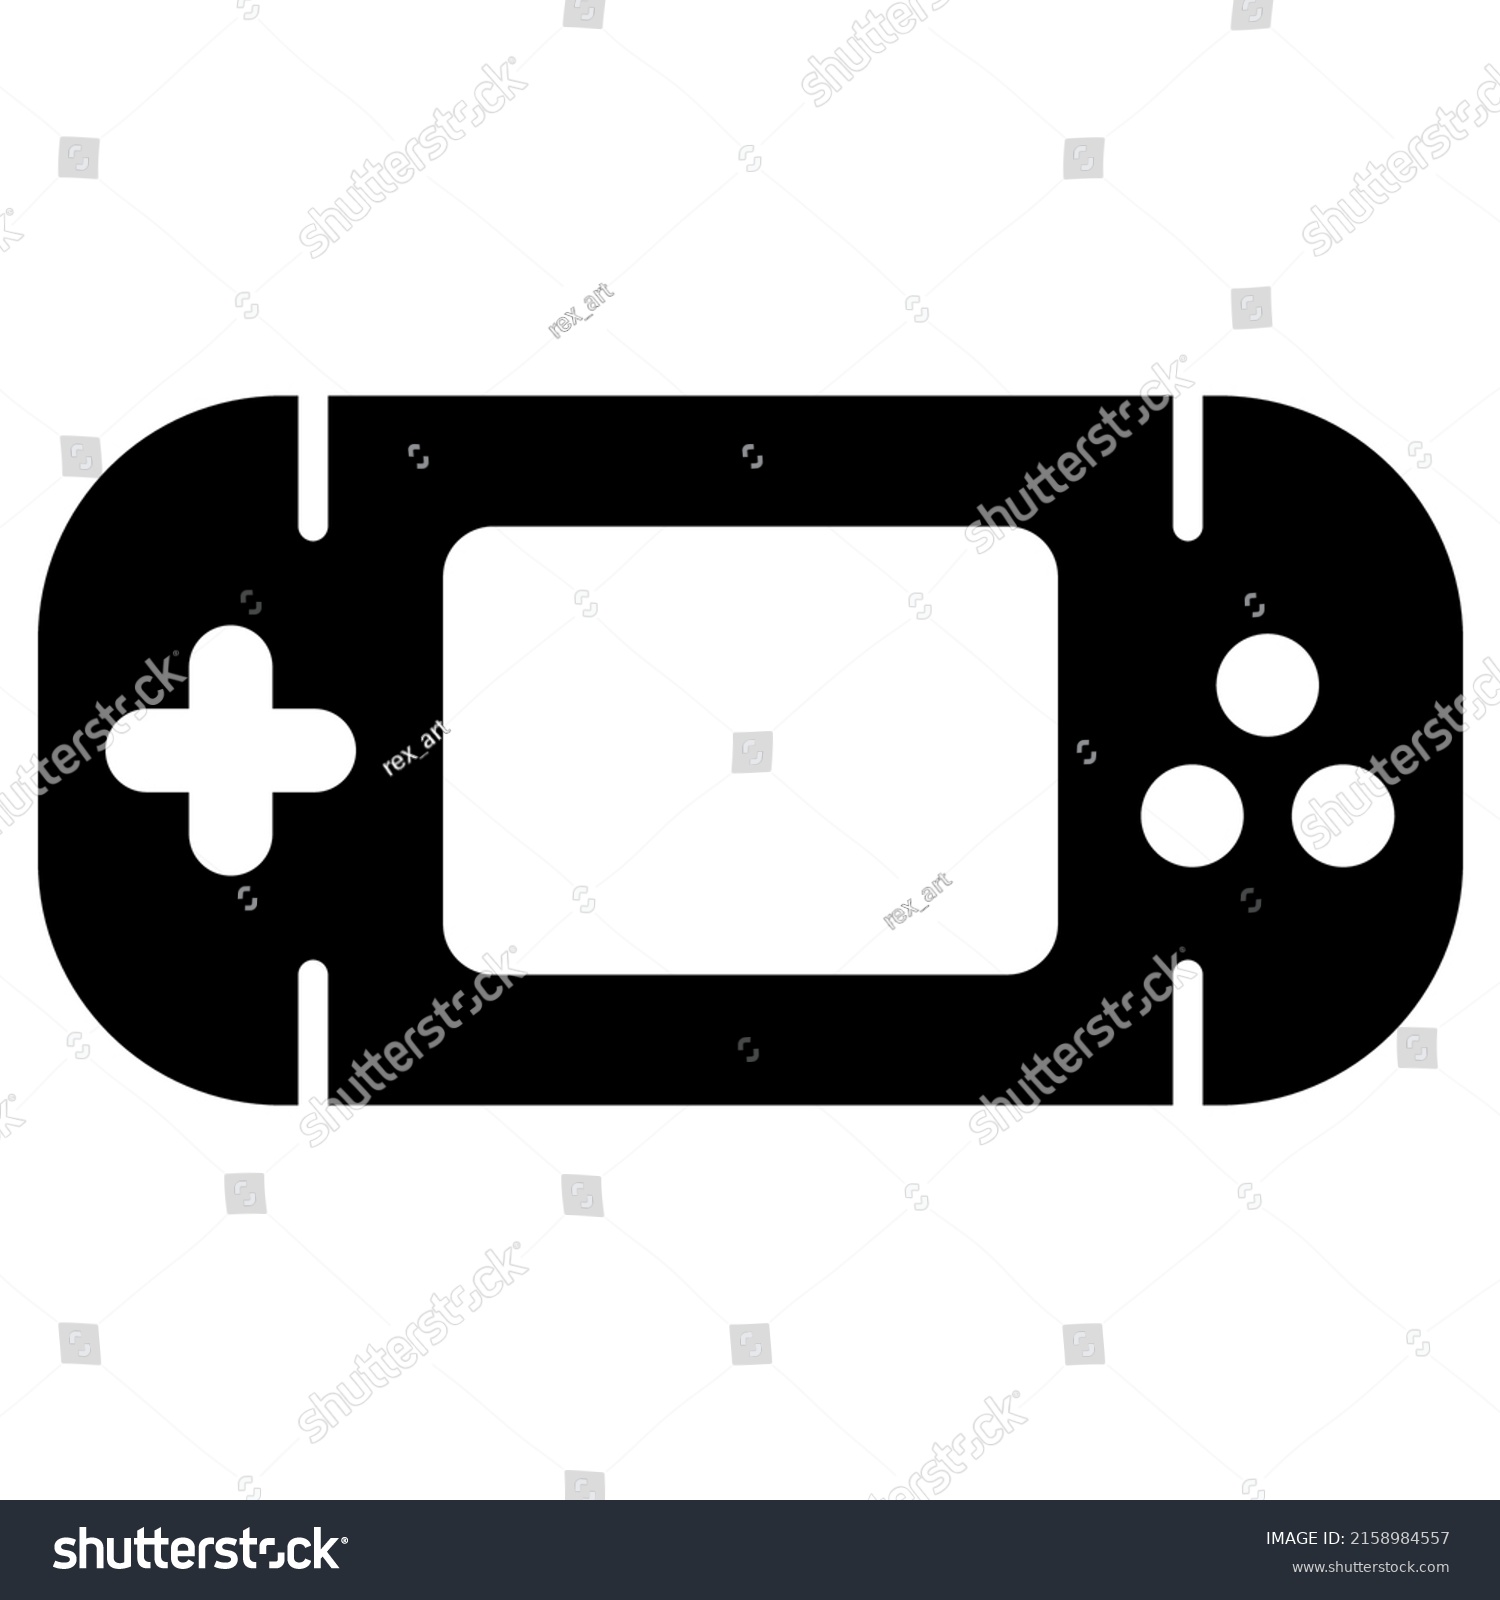 SVG of Game Console icon design, vector illustration, best used for presentations svg